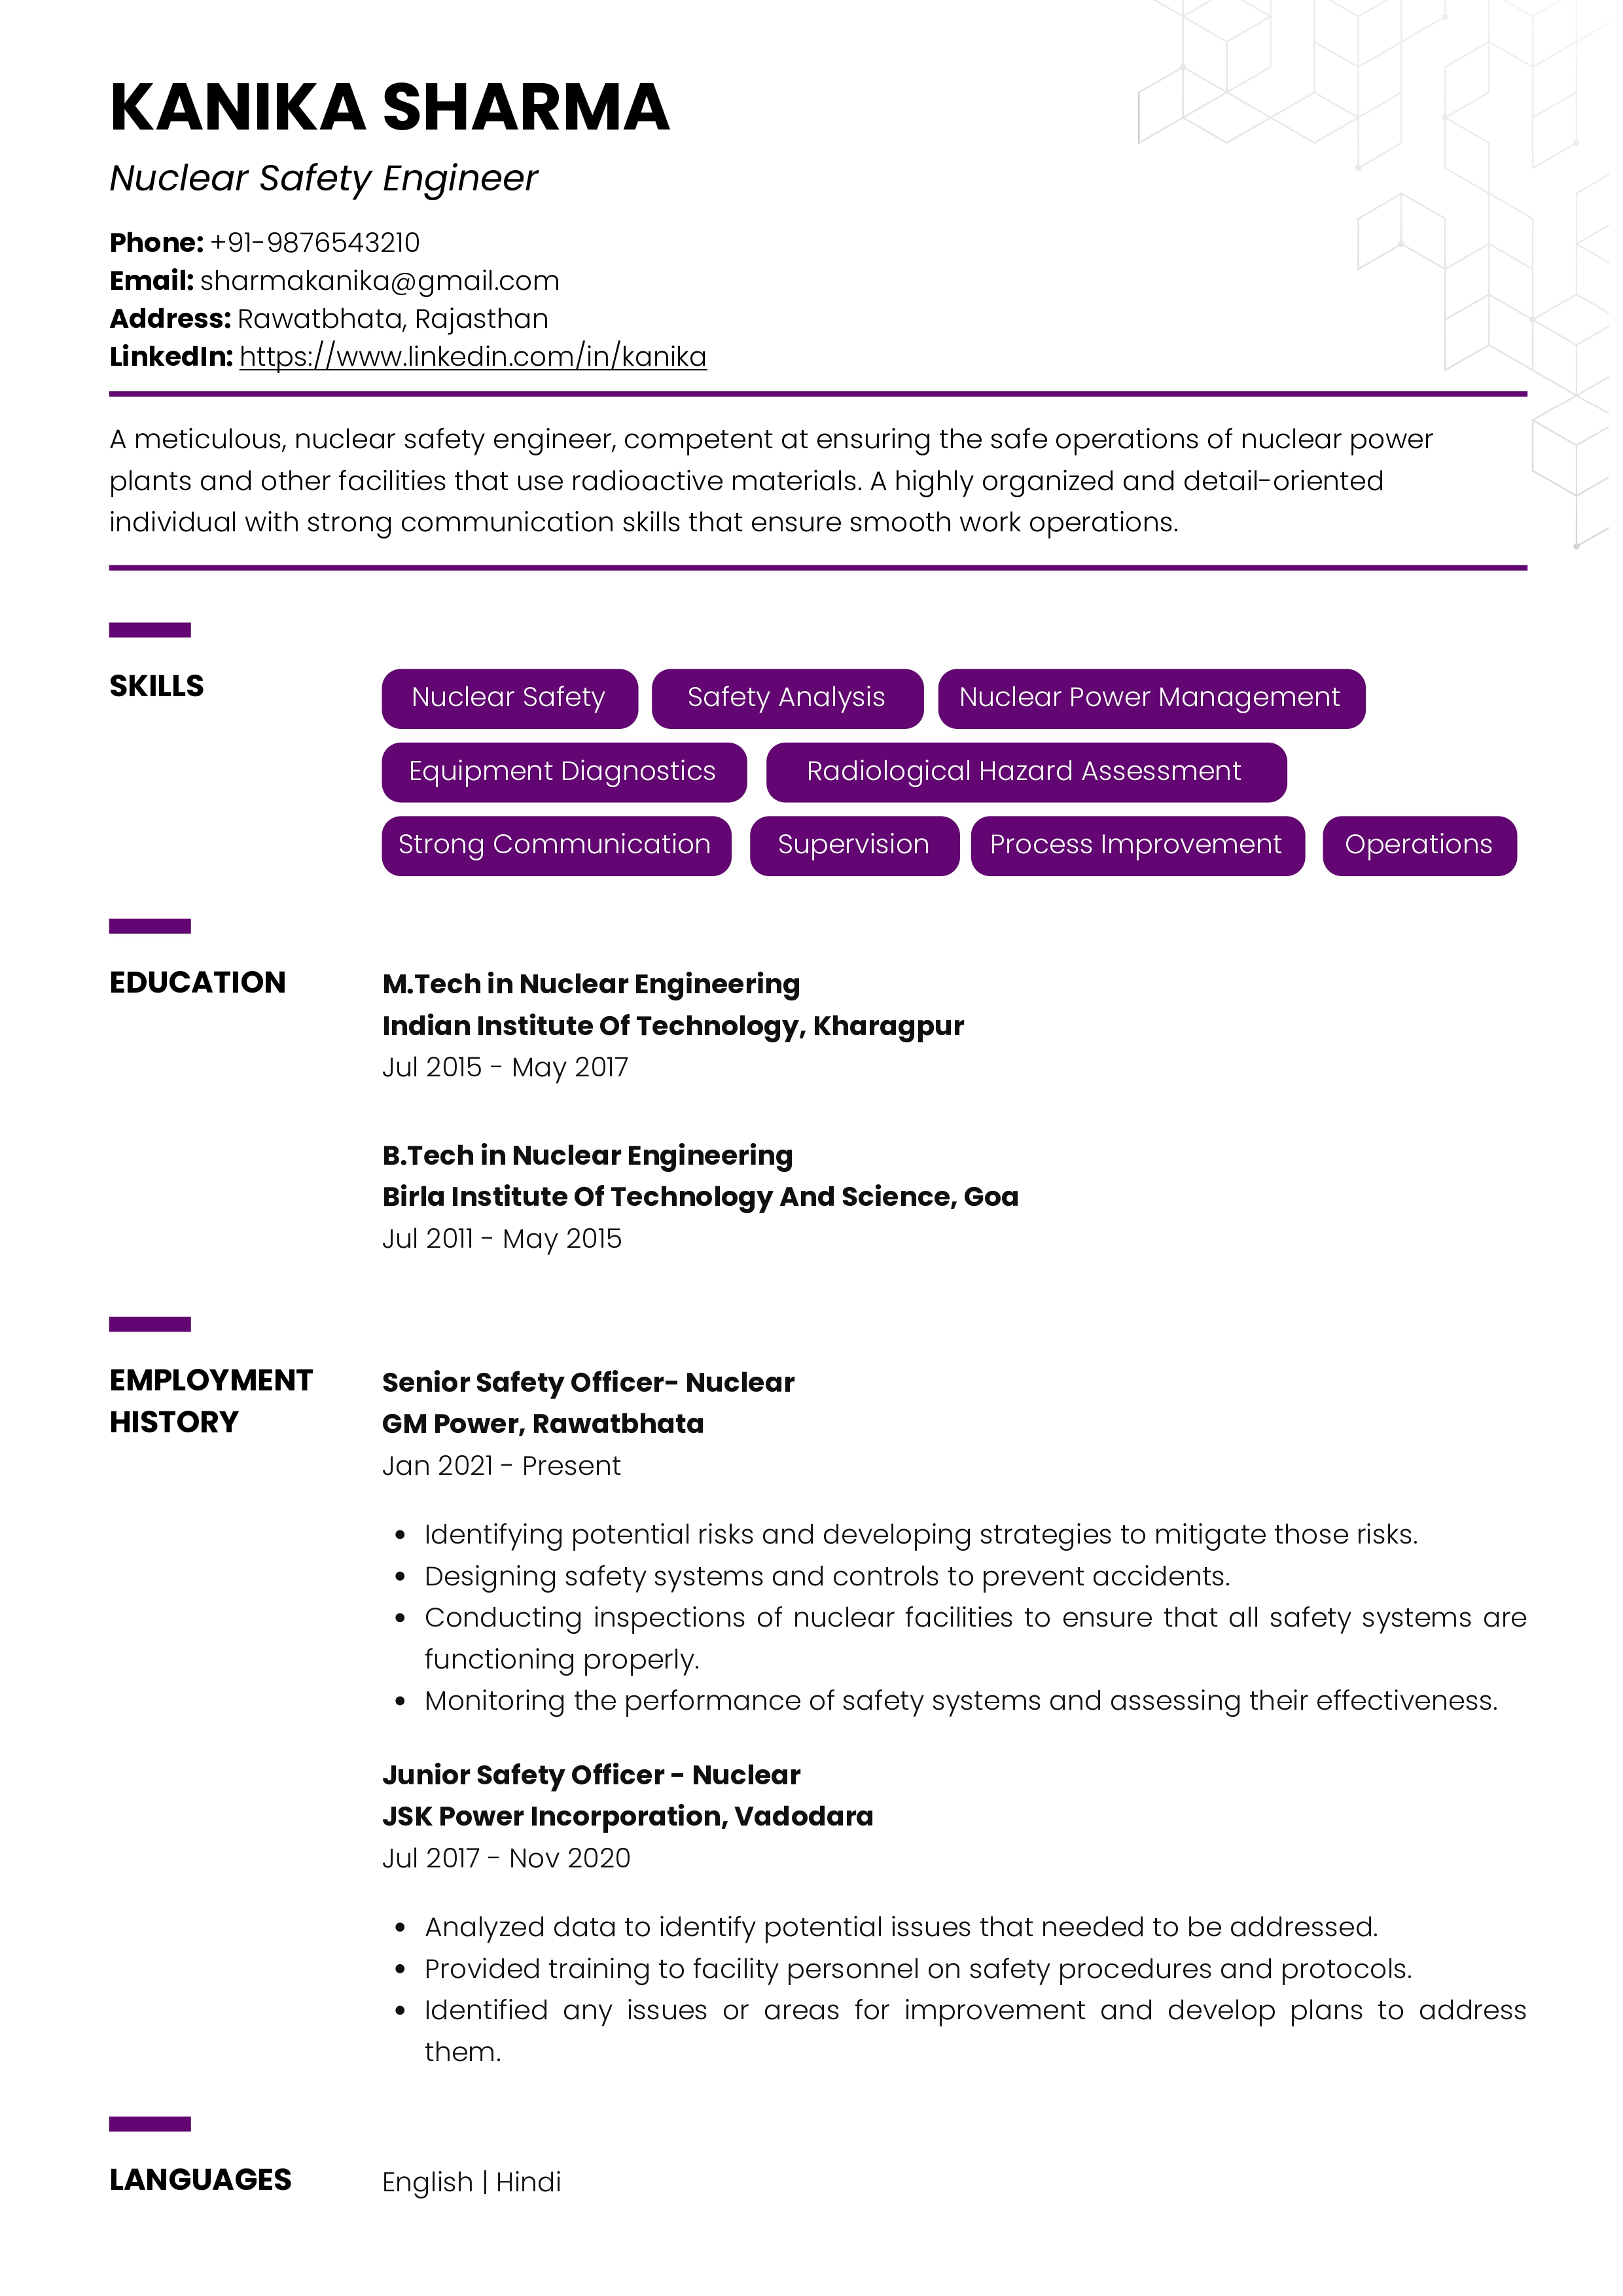 Sample Resume of  Nuclear Safety Engineer | Free Resume Templates & Samples on Resumod.co